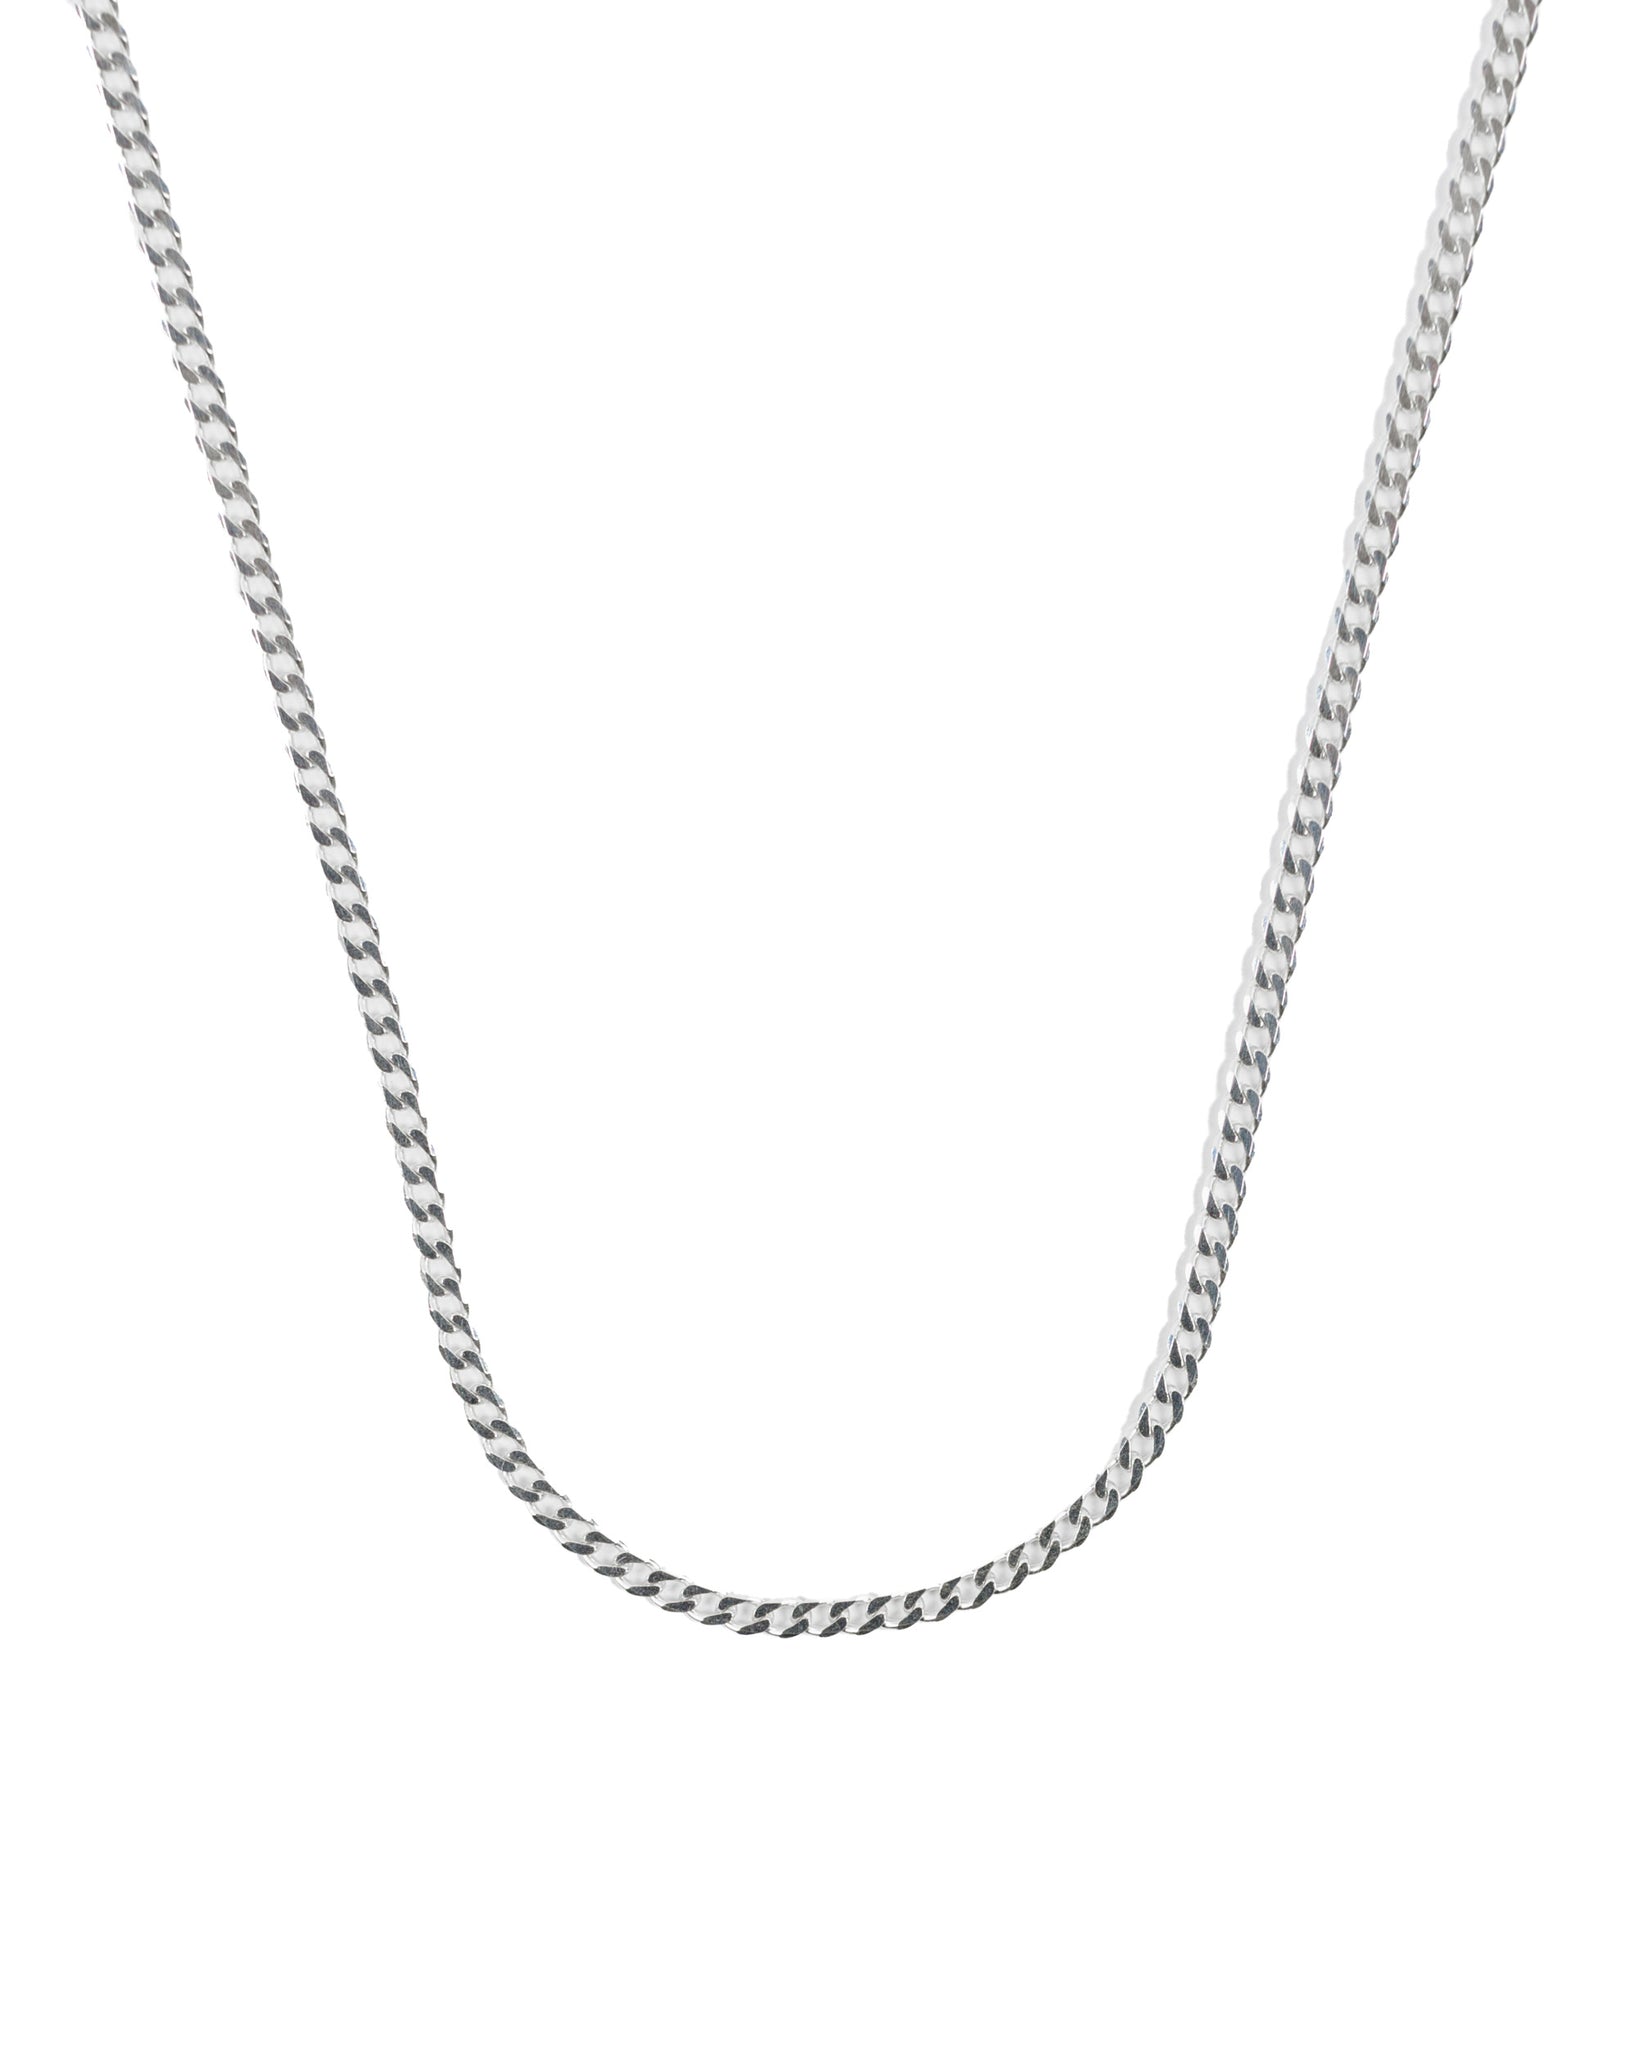 Lost & Found Curb Link Necklace 20"